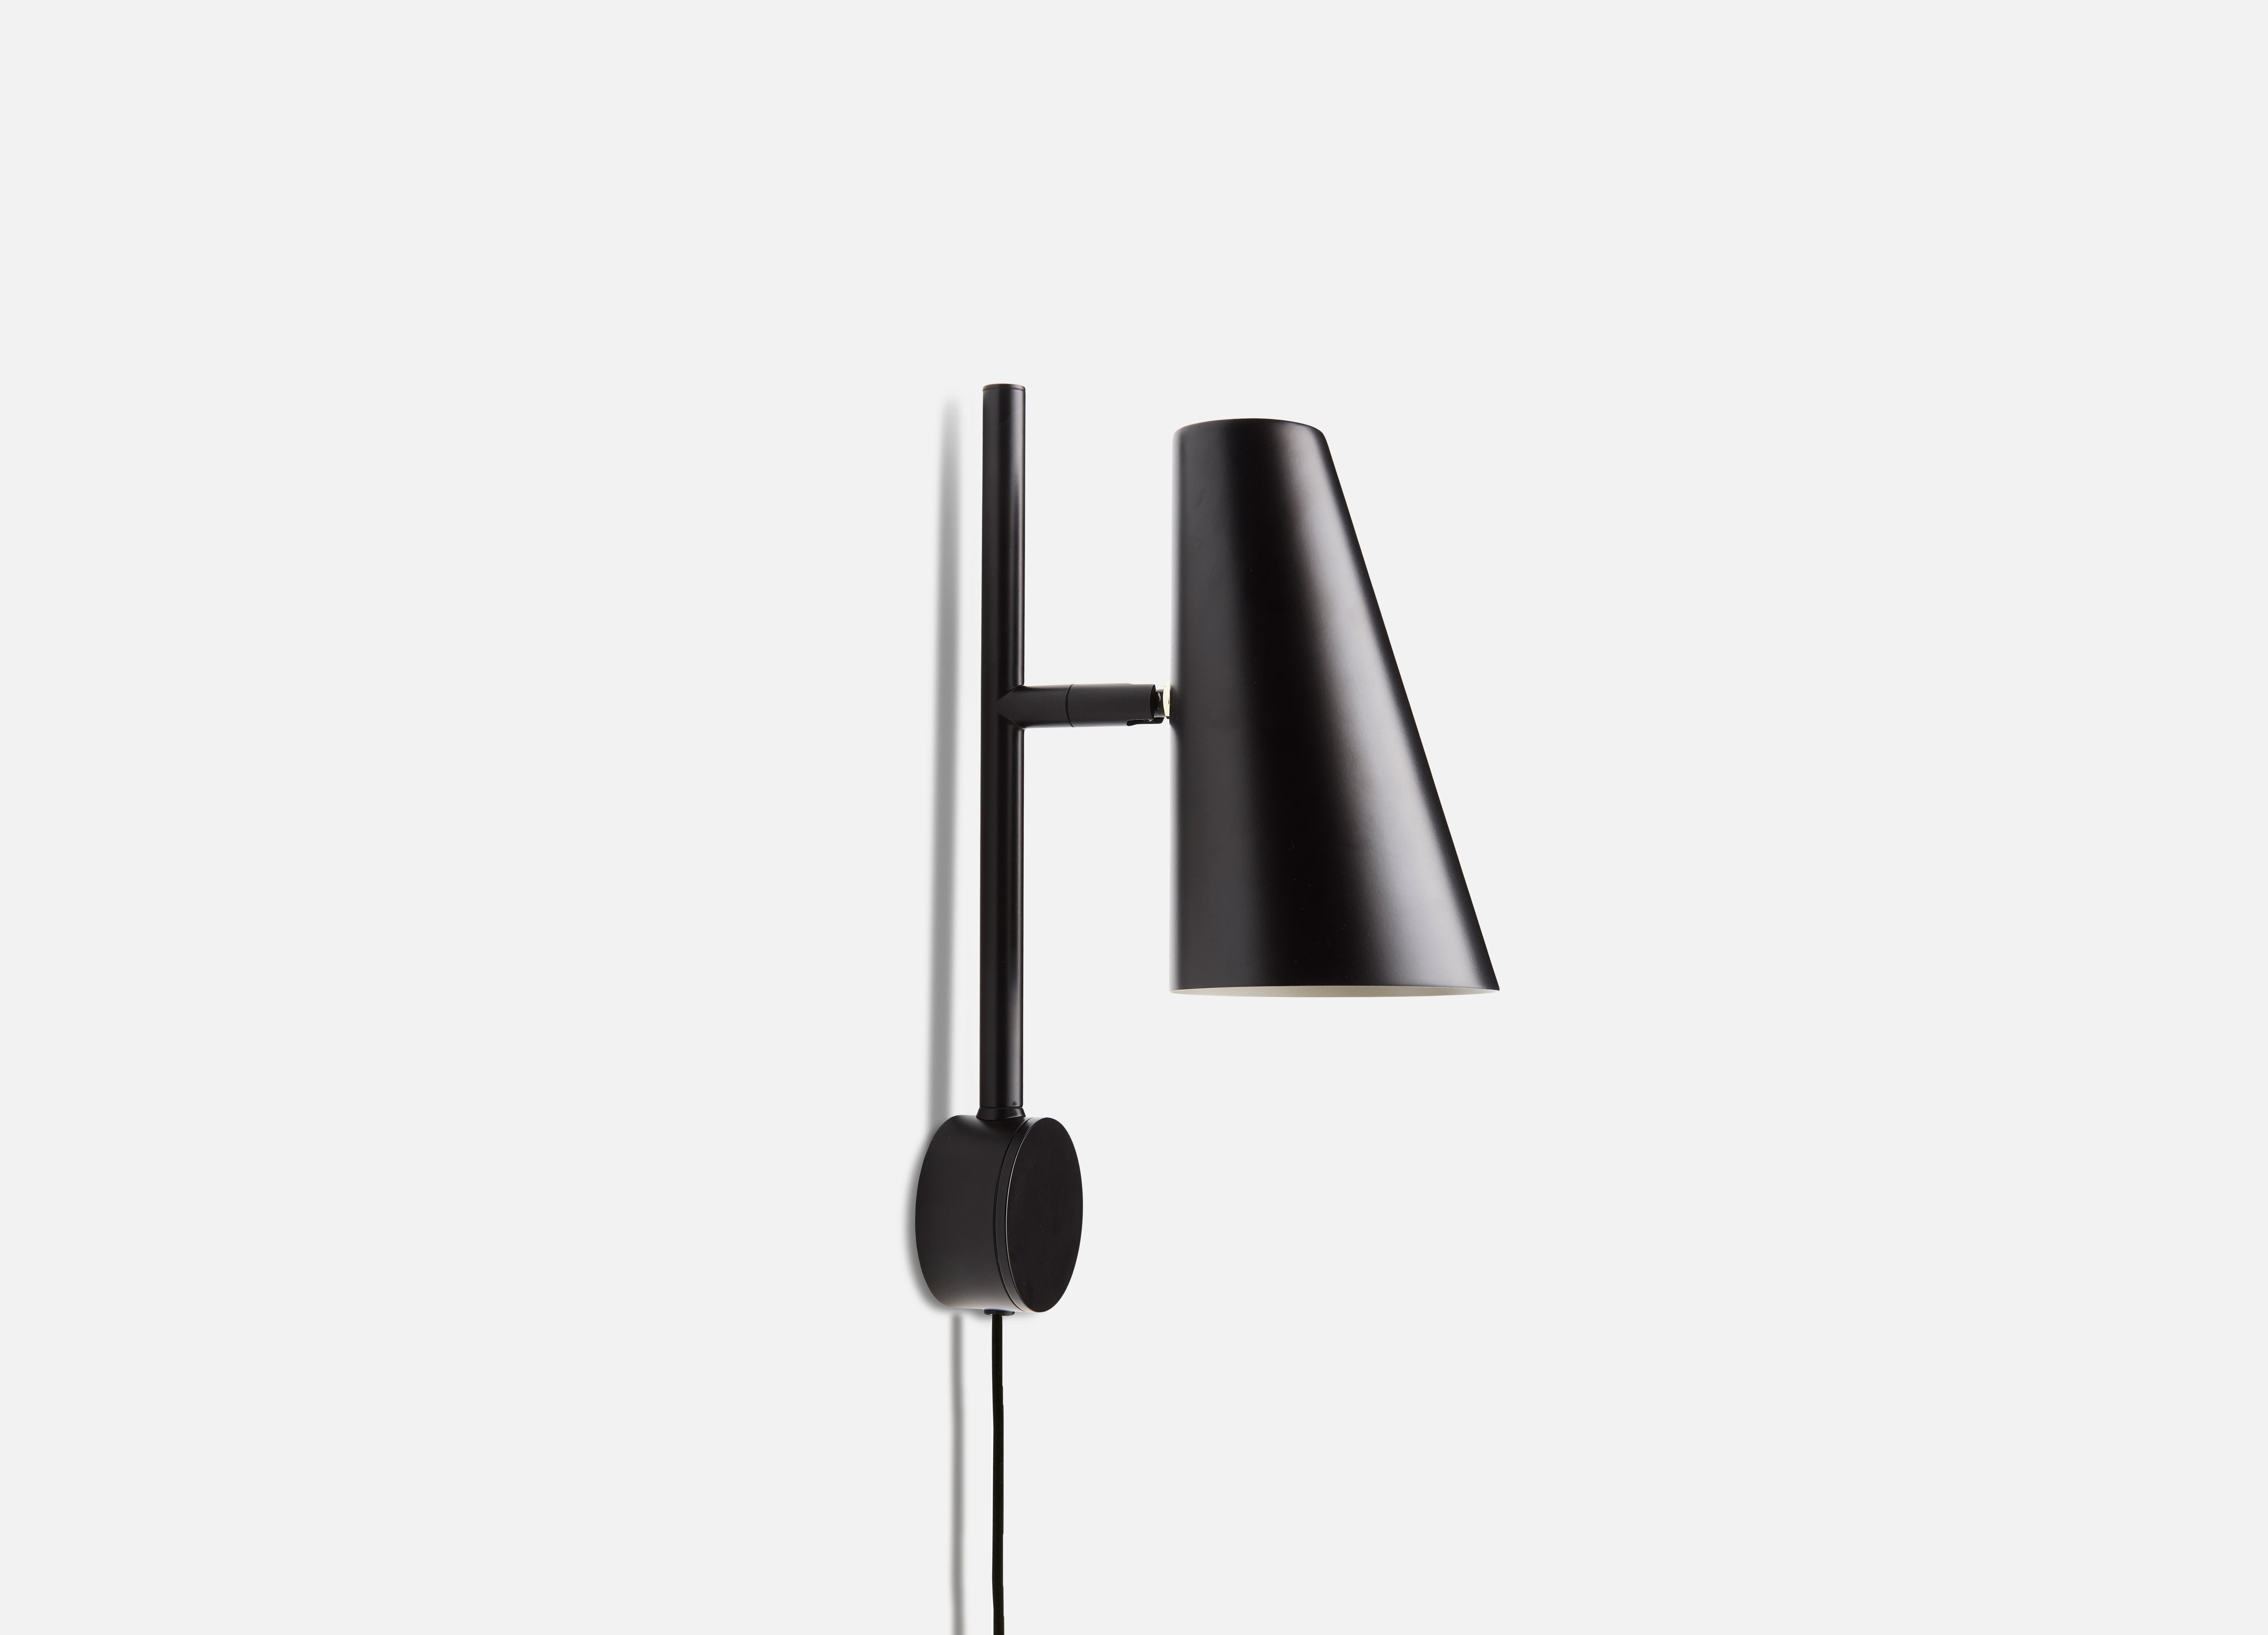 Black Cono wall lamp by Benny Frandsen.
Materials: Metal.
Dimensions: D 11 x W 17 x H 33.3 cm.
Available in black or satin.

Benny Frandsen is a renowned and experienced danish designer and founder of the lighting company frandsen, which has